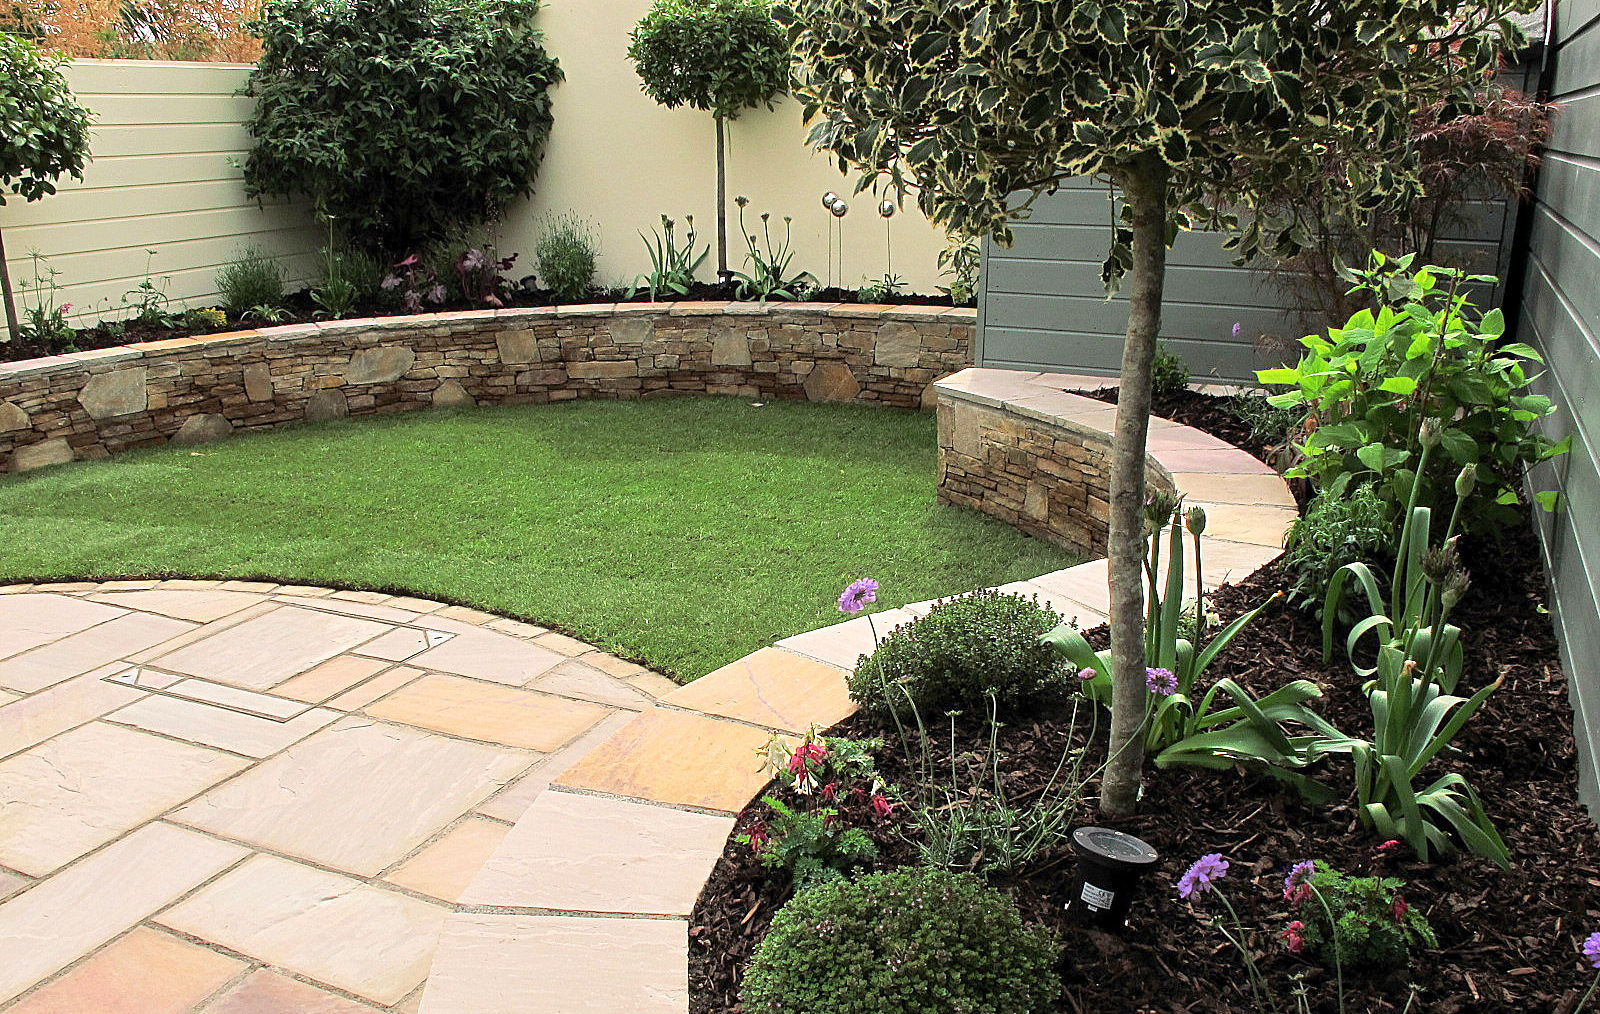 Stunning Raised Beds in natural stone | Owen Chubb Garden Landscapers, Tel 087-2306128